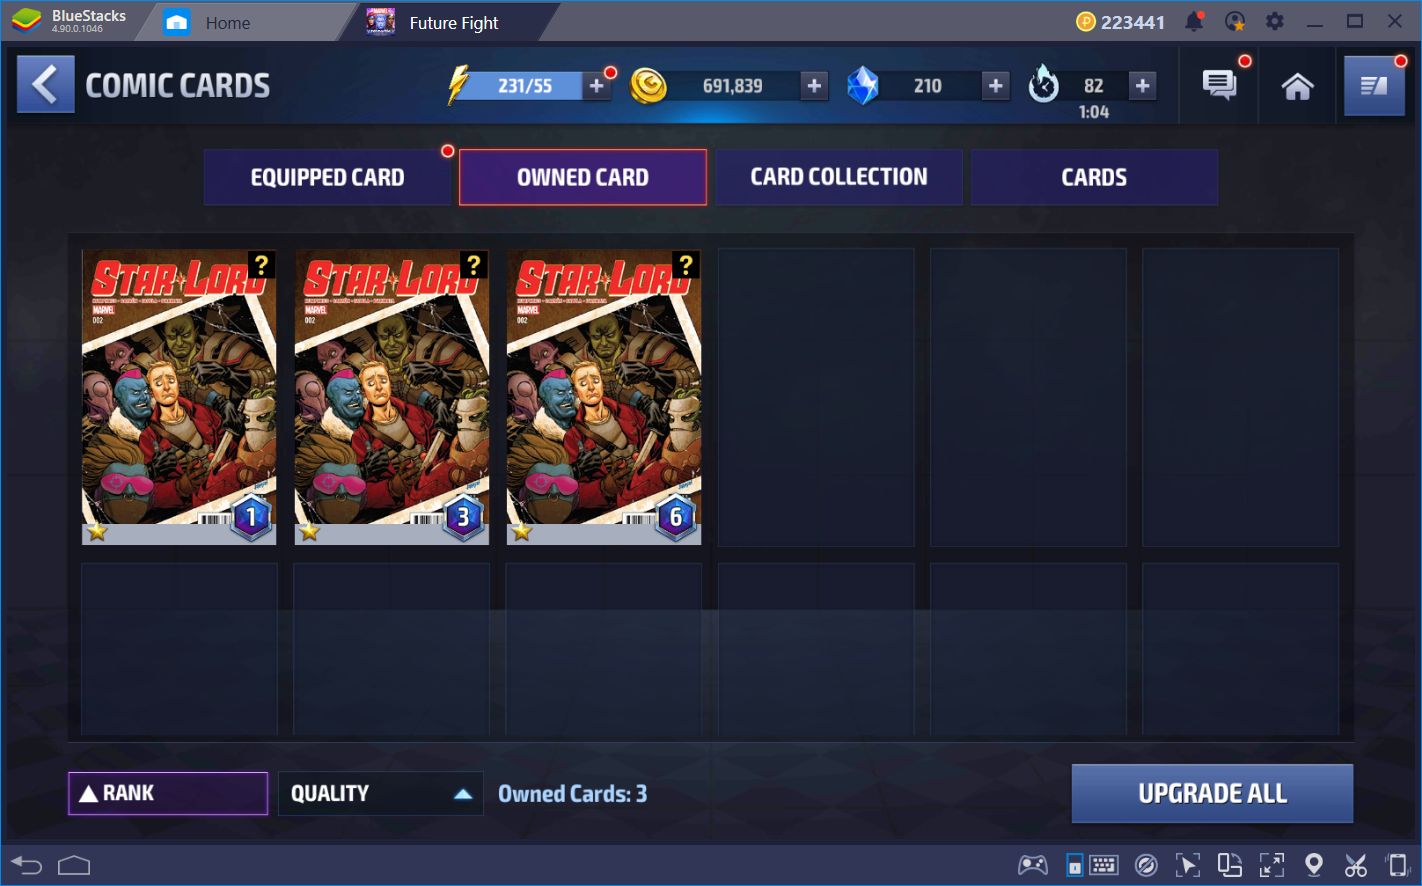 Marvel Future Fight: All You Need to Know About the Comic Cards